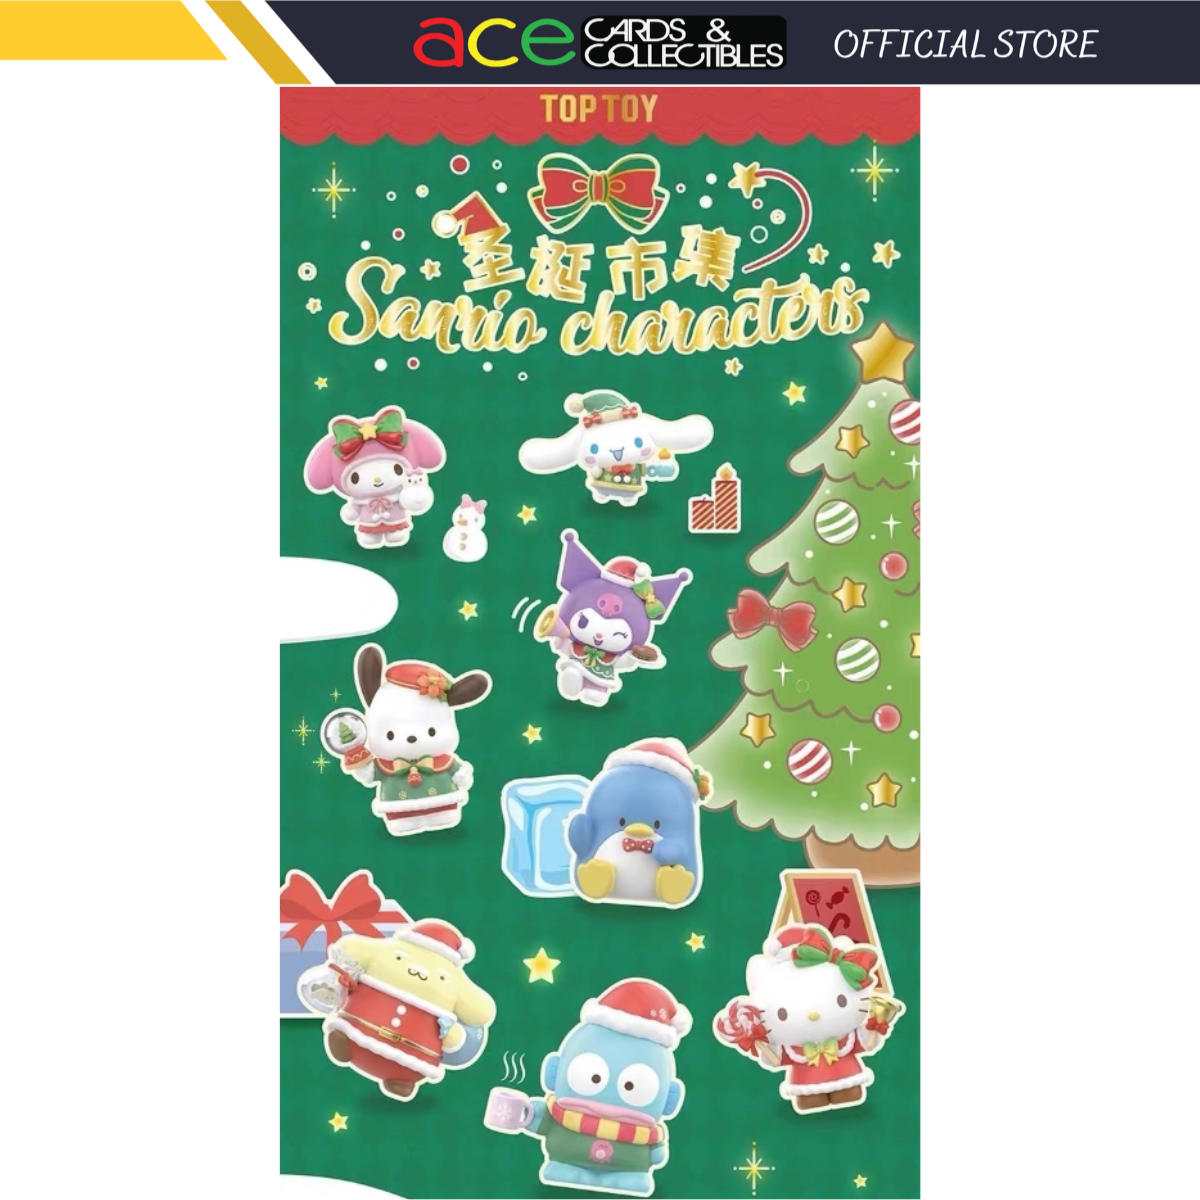 Sanrio Characters Christmas Market Series-Single Box (Random)-TopToy-Ace Cards & Collectibles